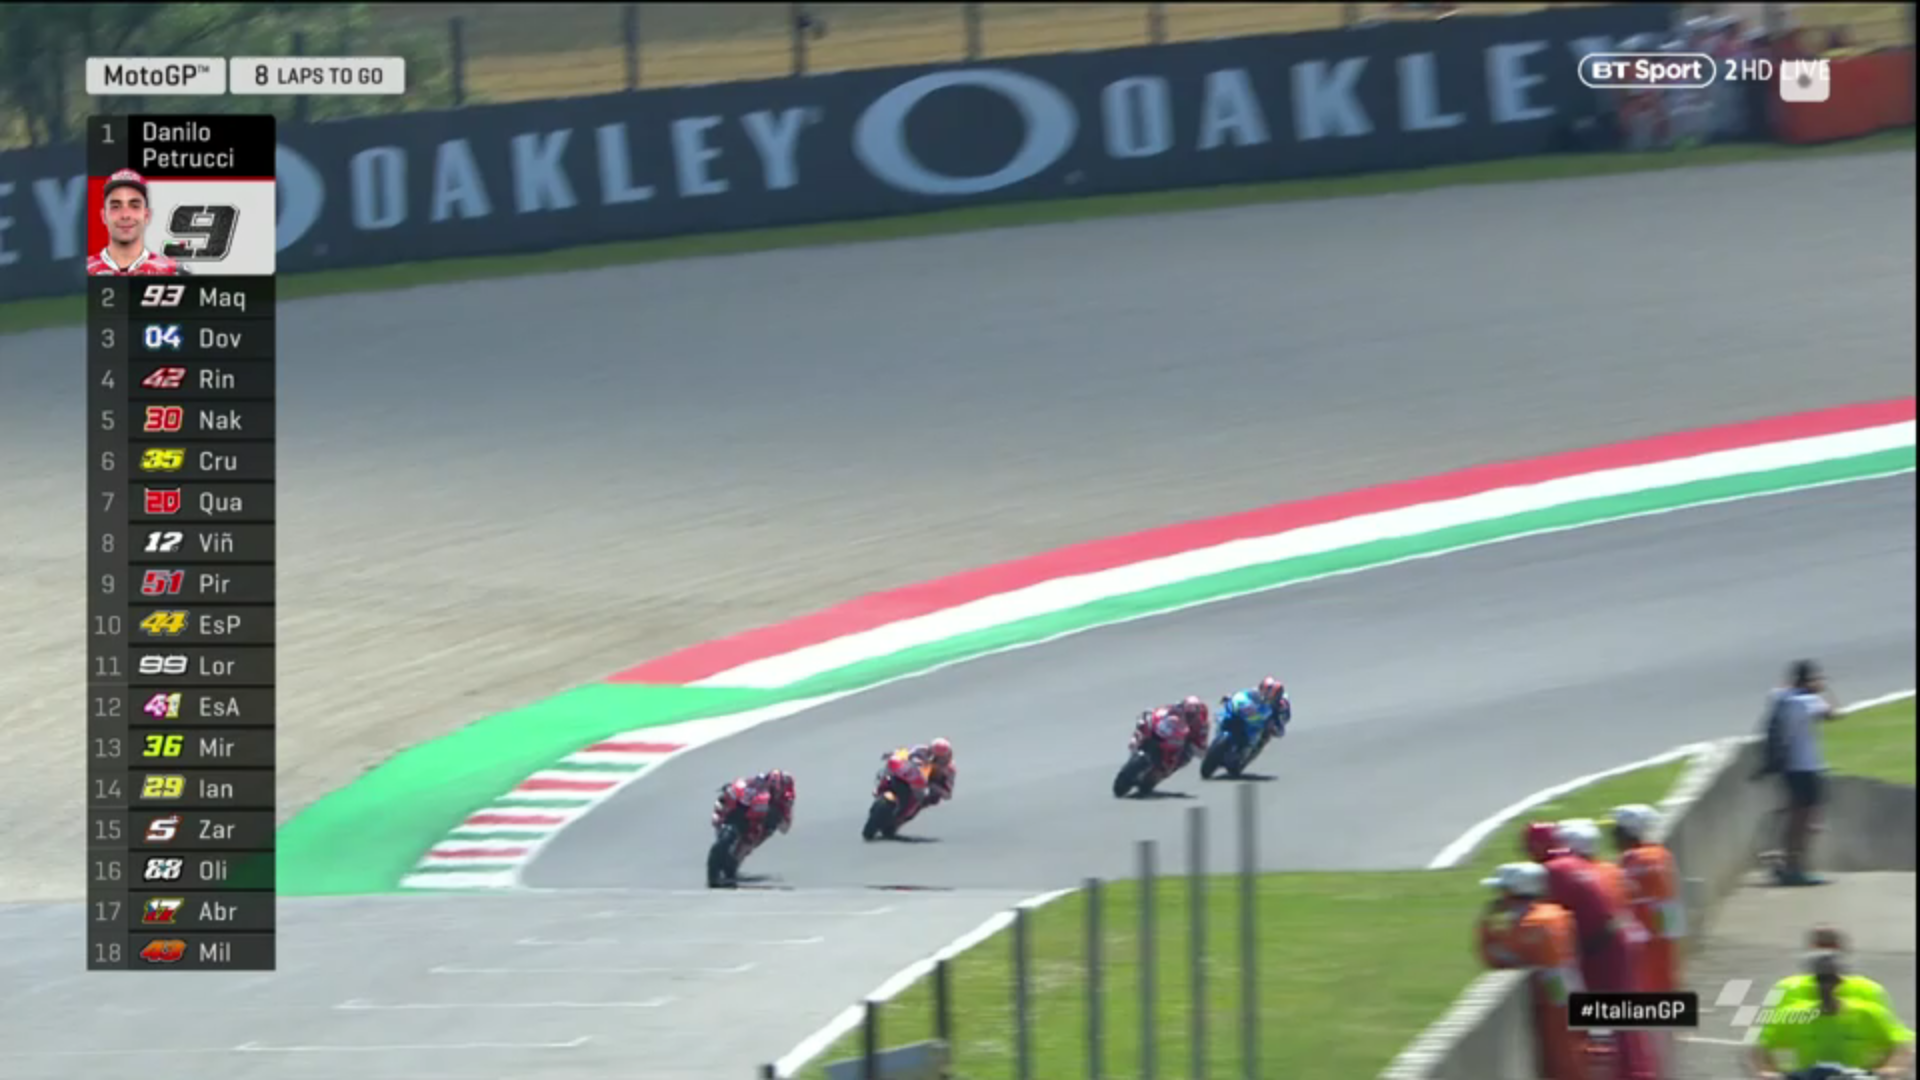 Analysis How F1 and MotoGP have interpreted Mugello differently from a broadcasting perspective